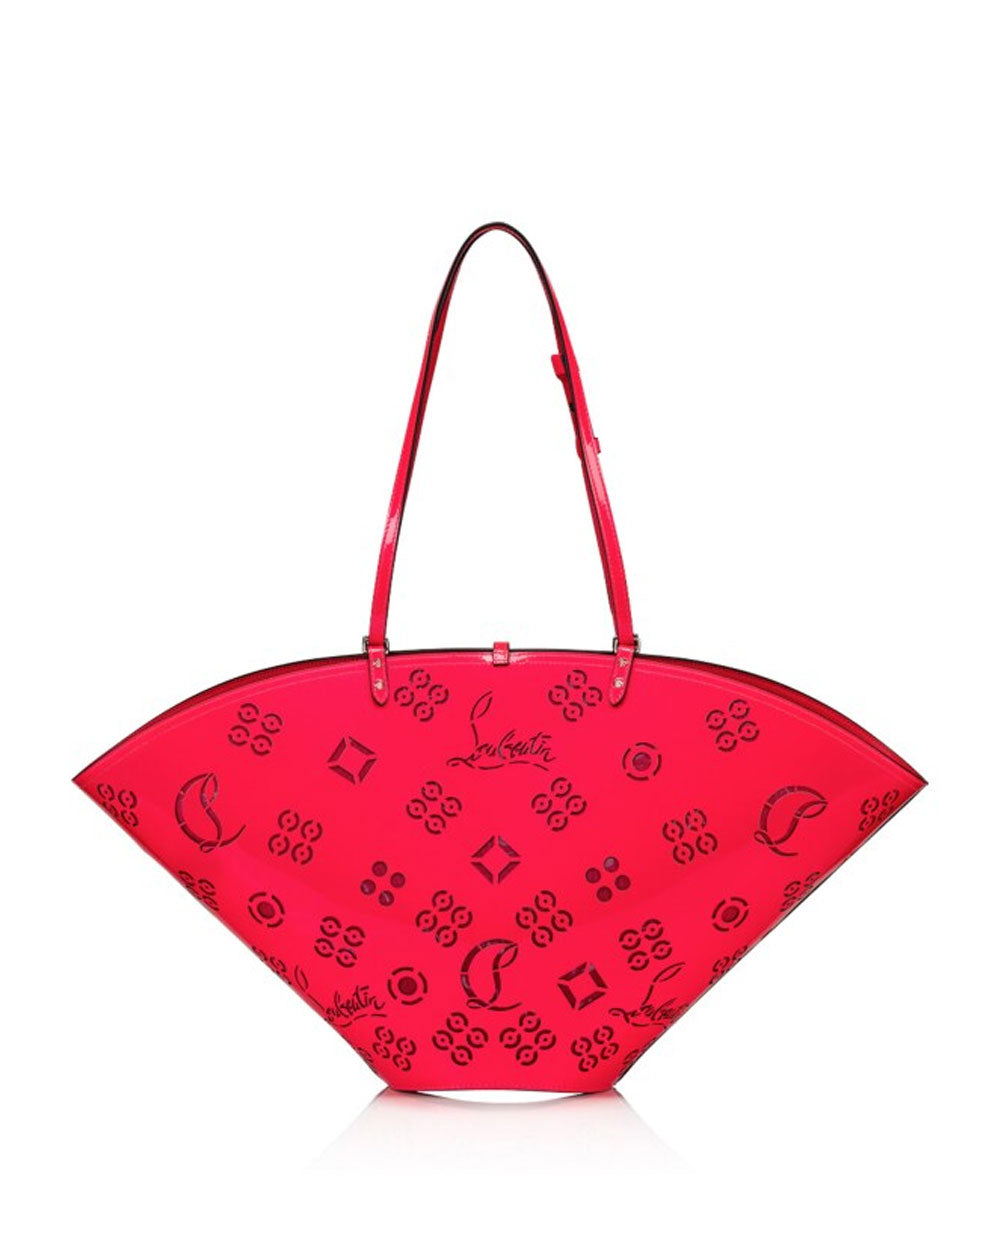 Loubifever Tote Bag in Fluo Pink